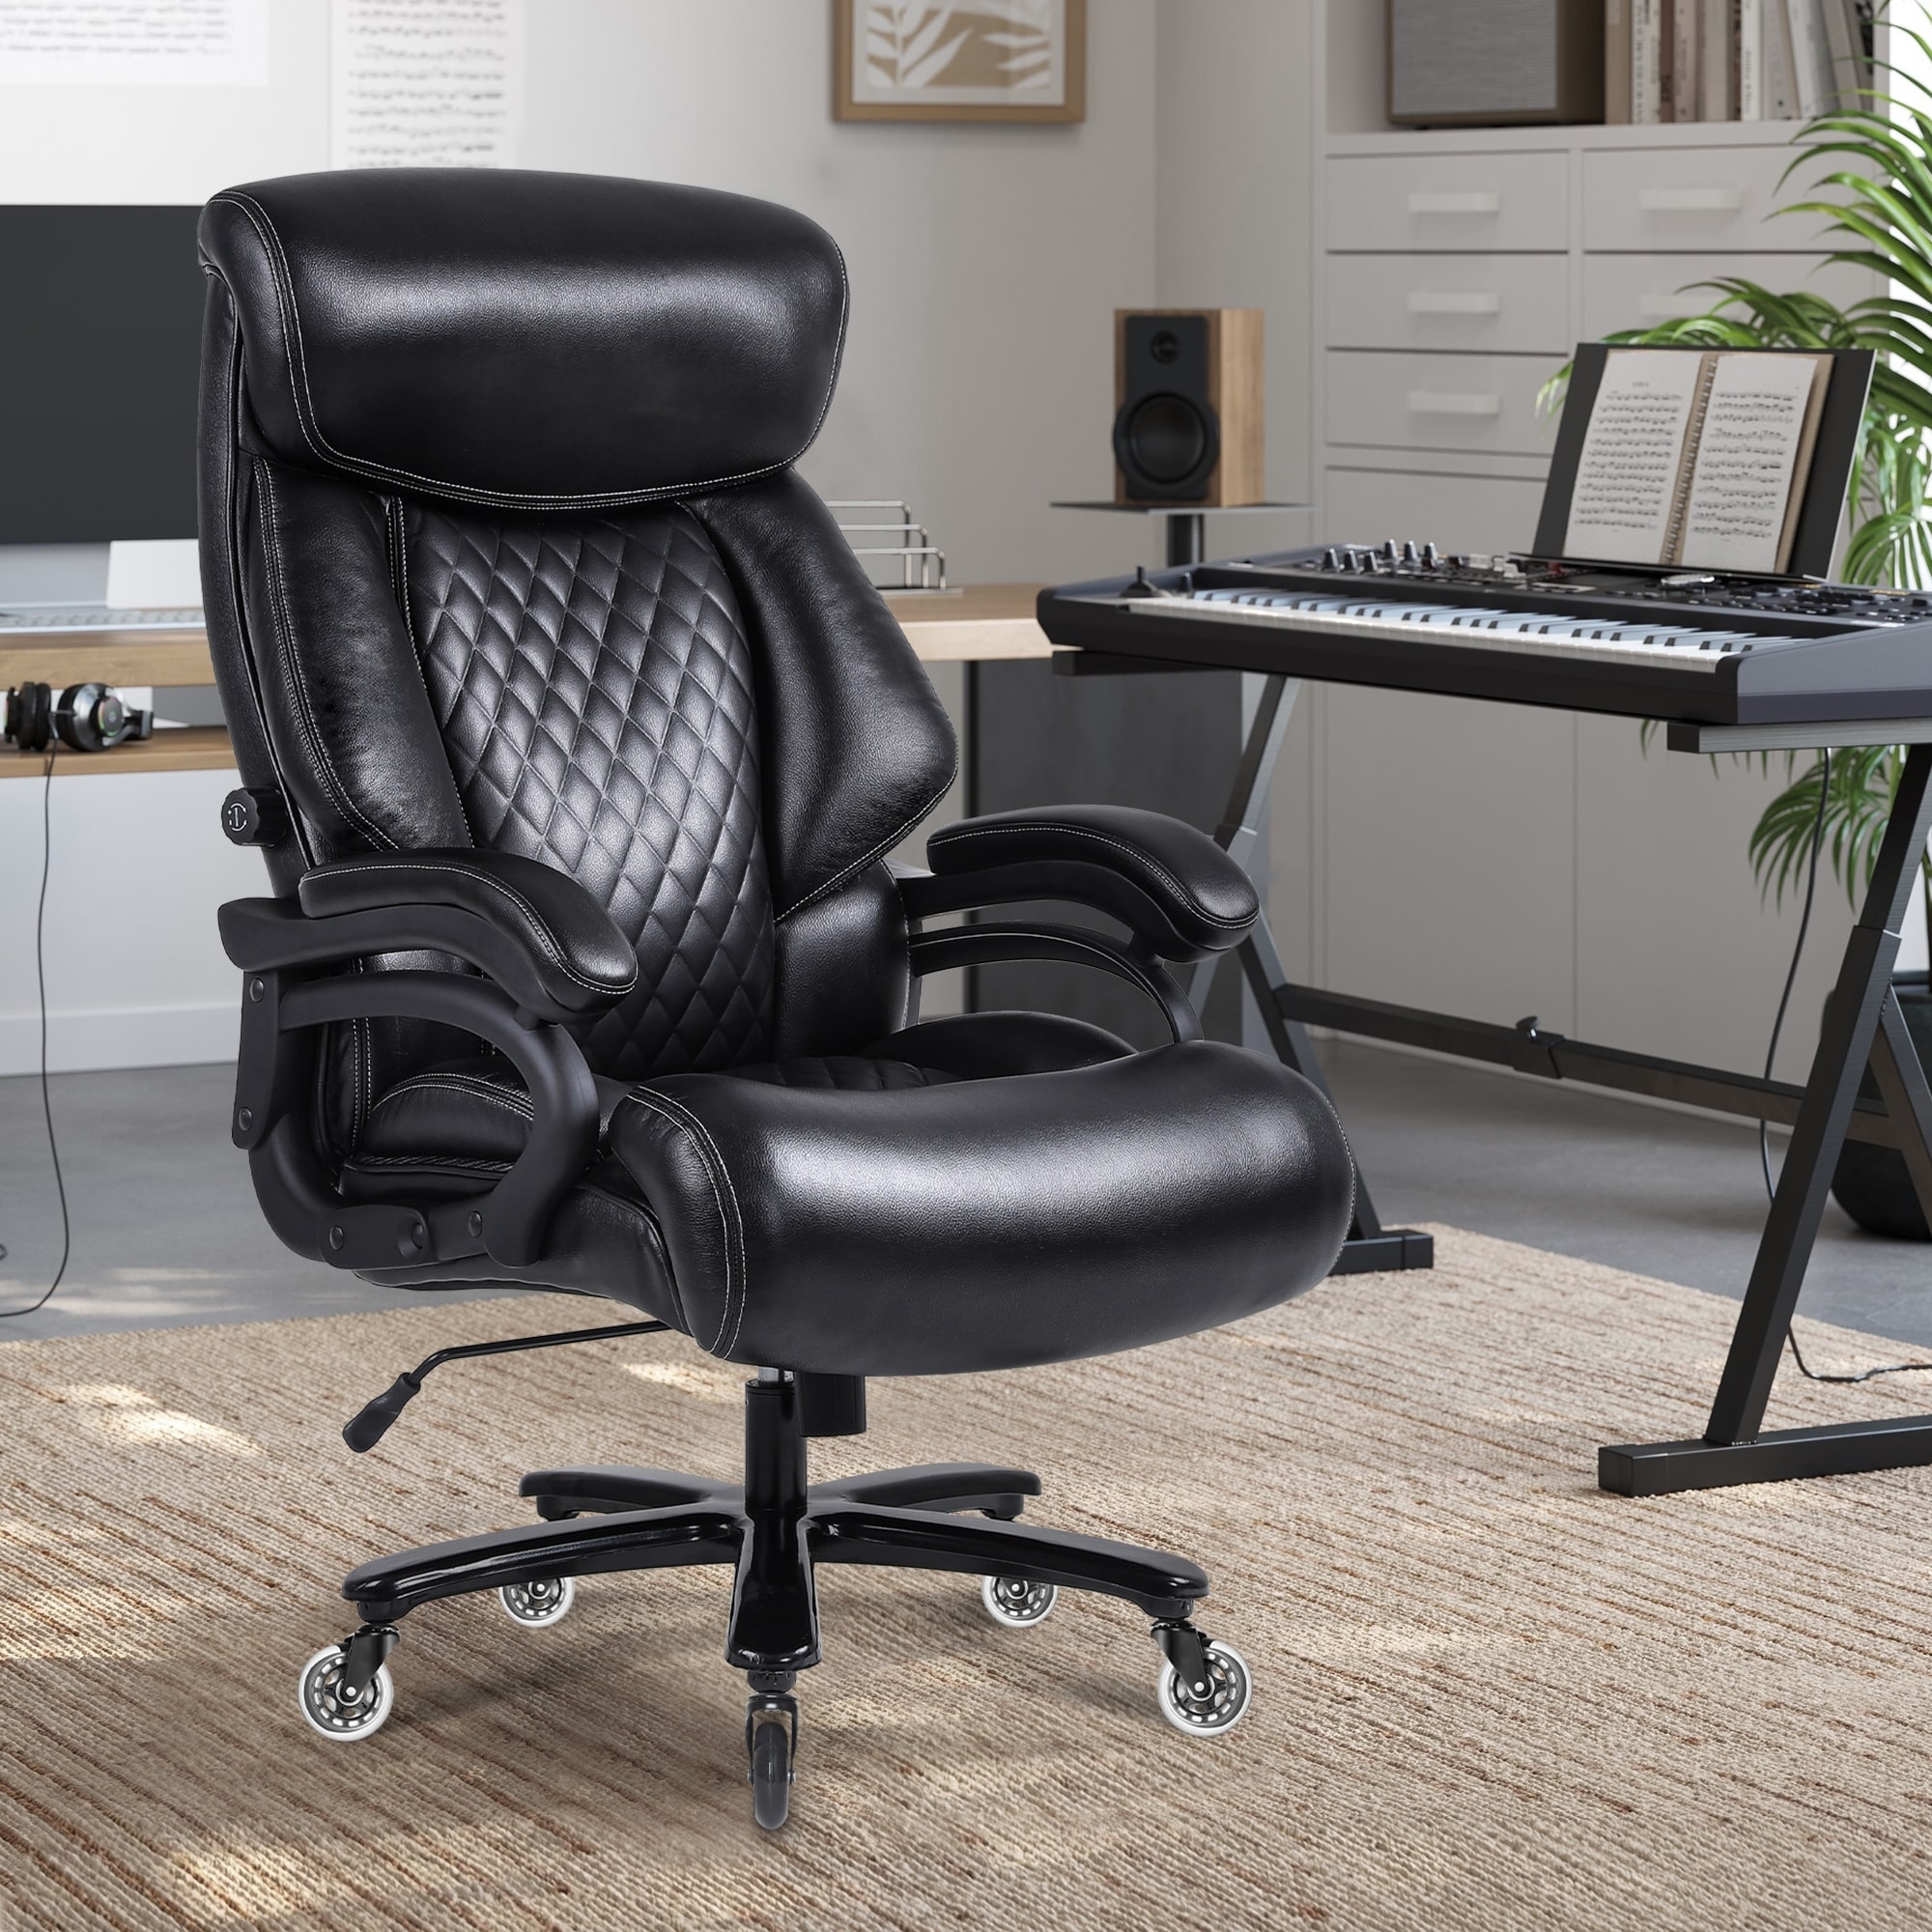 https://ak1.ostkcdn.com/images/products/is/images/direct/80165ce40b3c982f76d1c1e40b641d105a473428/Big-and-Tall-Office-Chair-500lbs-for-Heavy-People-with-Quiet-Rubber-Wheels.jpg